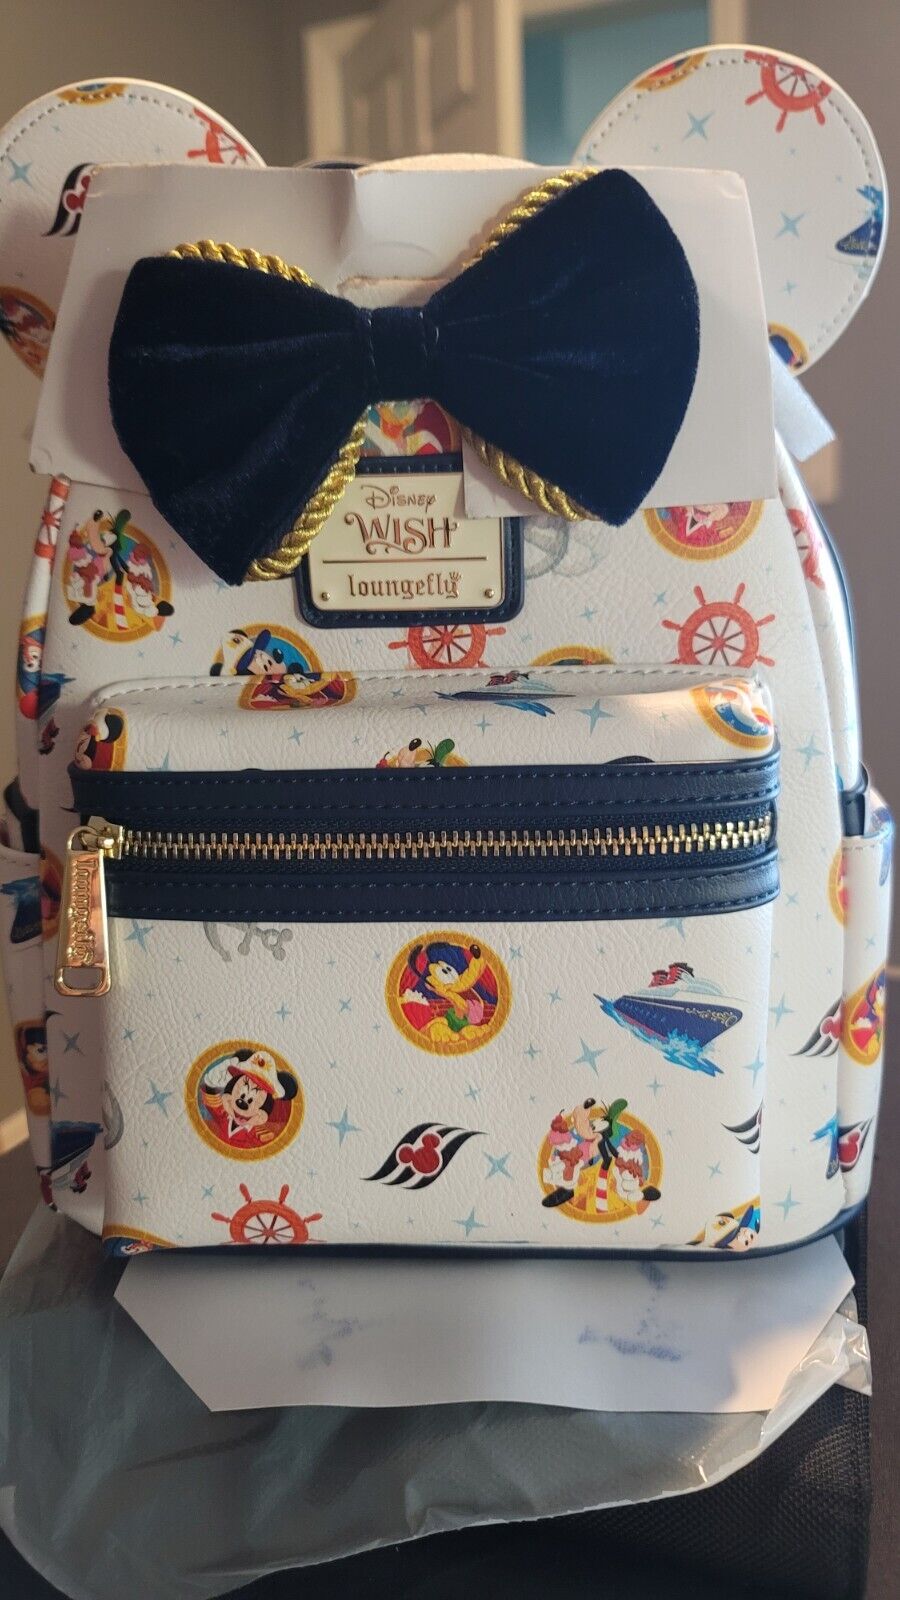 NEW Disney Cruise Line Loungefly Mini Backpack Wish Mickey Minnie Mouse White